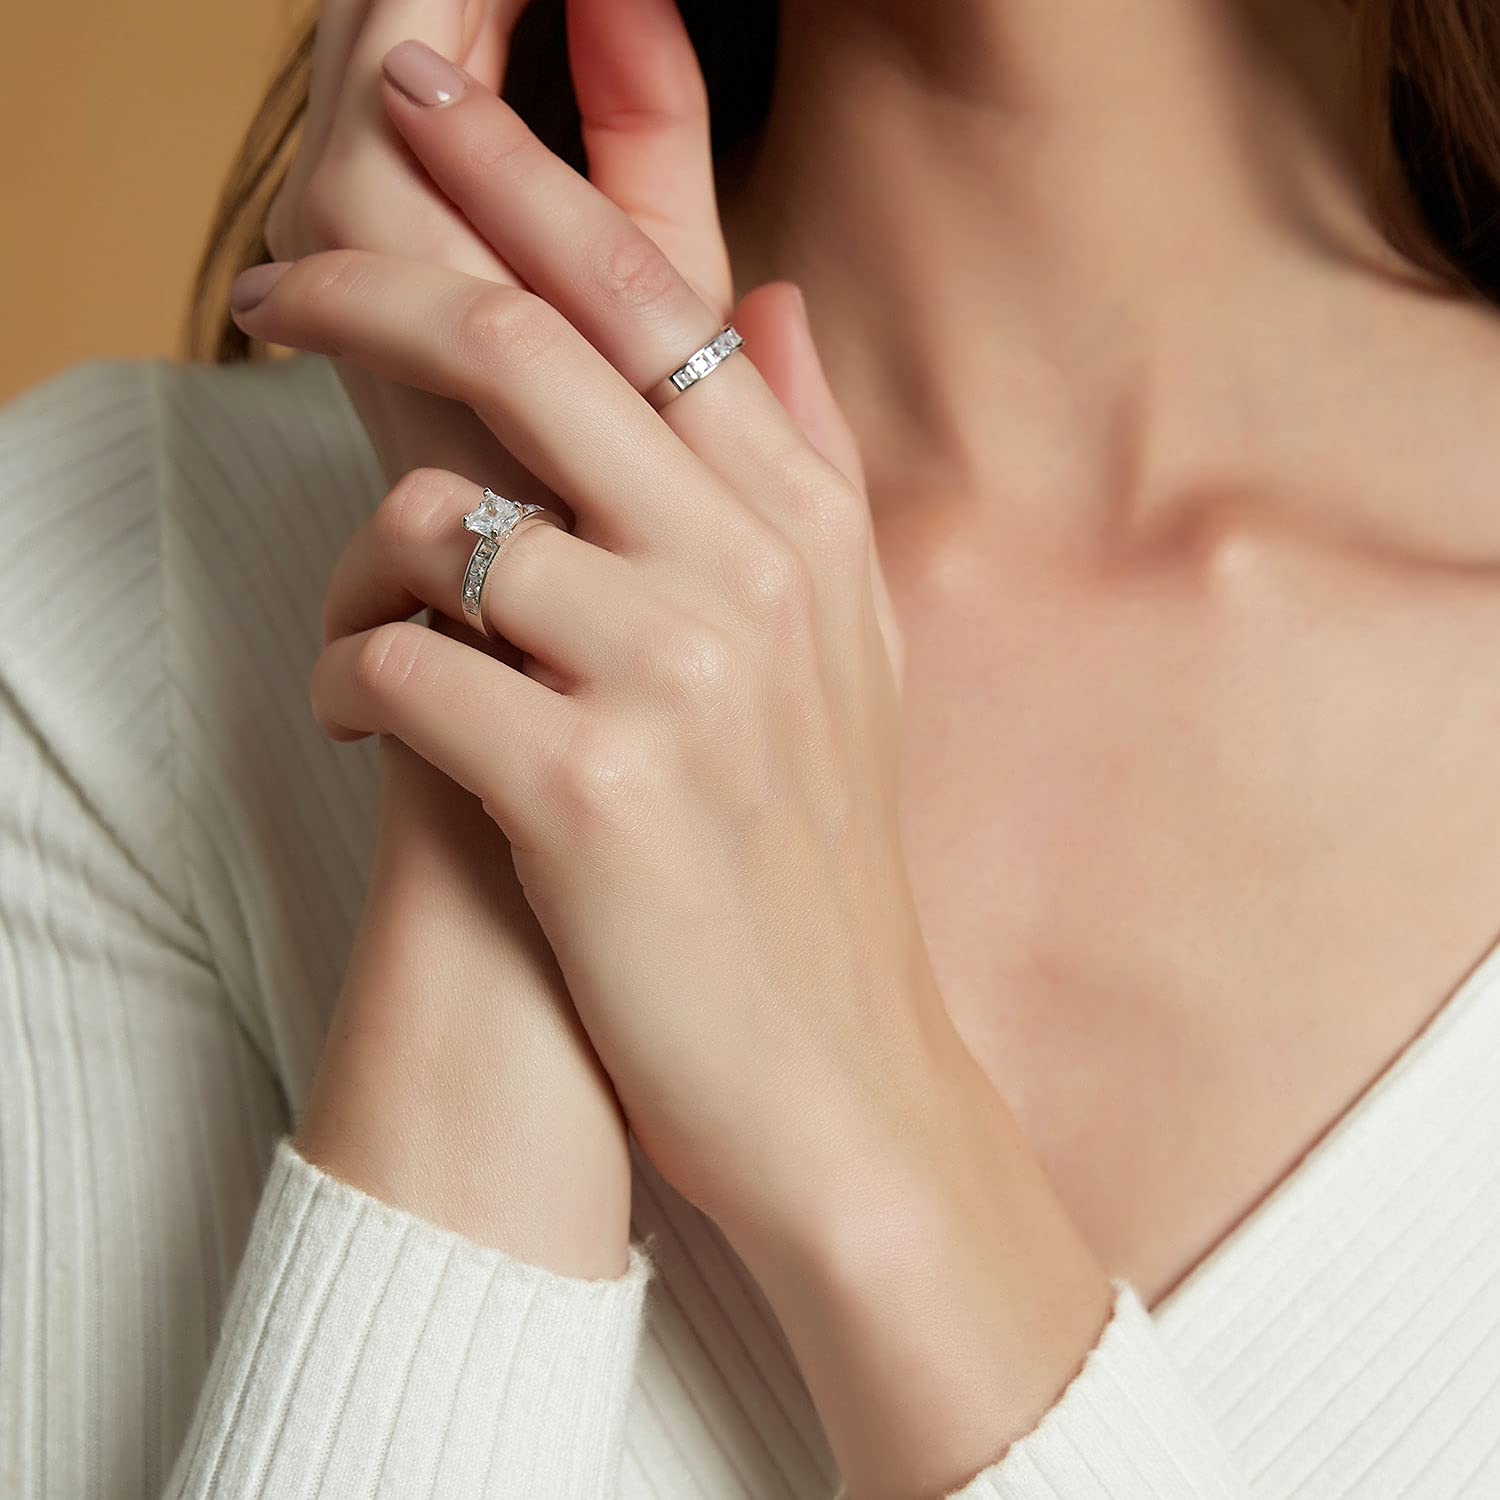  Shop for the perfect ring to celebrate your love.